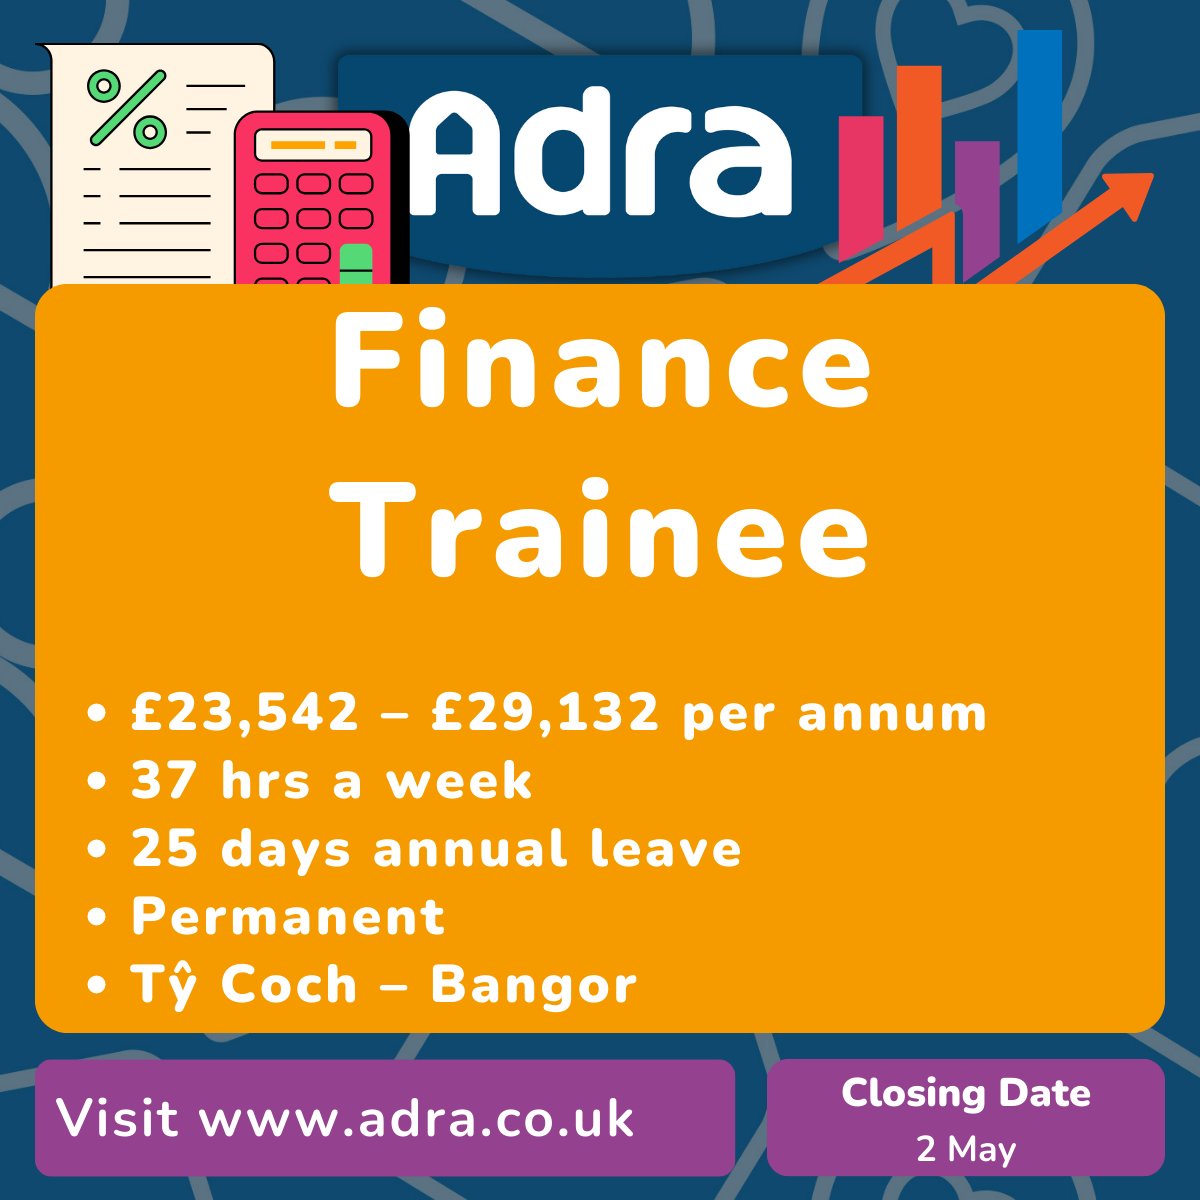 An unique opportunity to work in our Finance Team 1️⃣Do you have 5 GCSE's grades A-C - including Maths and English? 2️⃣Do you have experience of using Excel? 3️⃣Are you fluent in Welsh and English? This could be the opportunity for you! More info - adra.co.uk/en/jobs/curren…